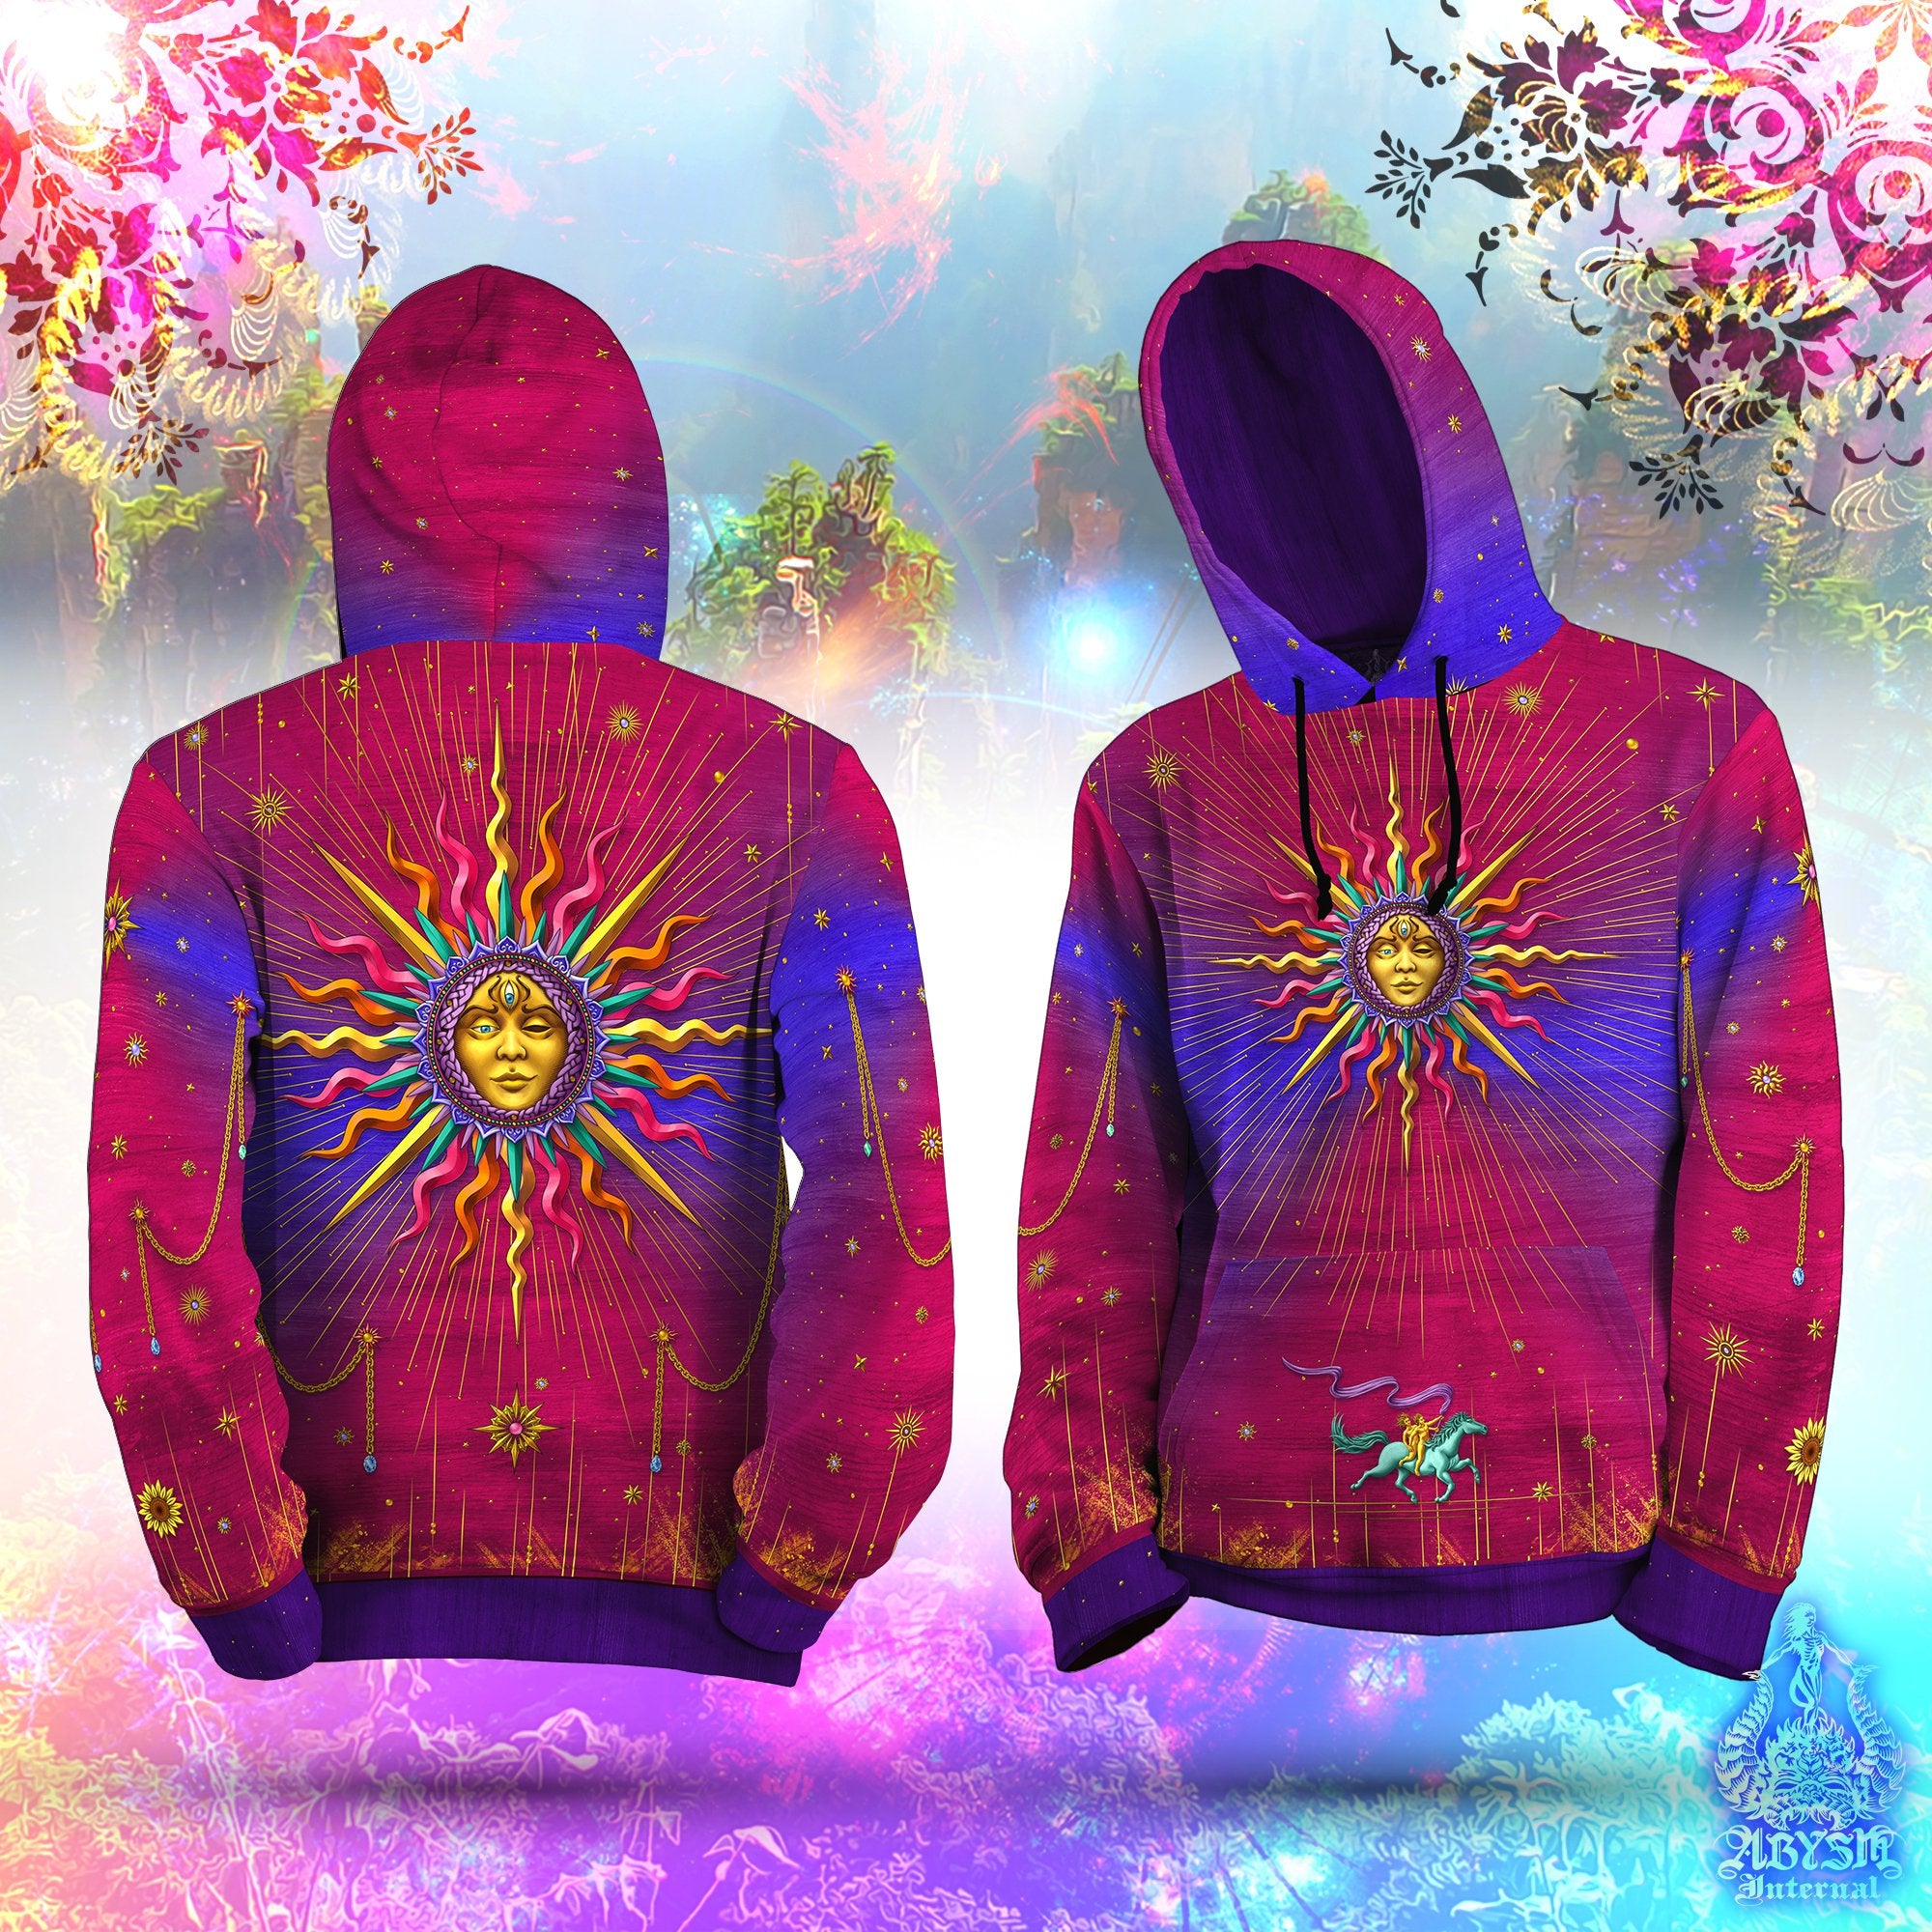 The Sun Hoodie, Boho Outfit, Tarot Arcana Pullover, Indie Sweater, Esoteric Street Festival, Magic Streetwear, Colorful Psy Clothing, Unisex - Abysm Internal